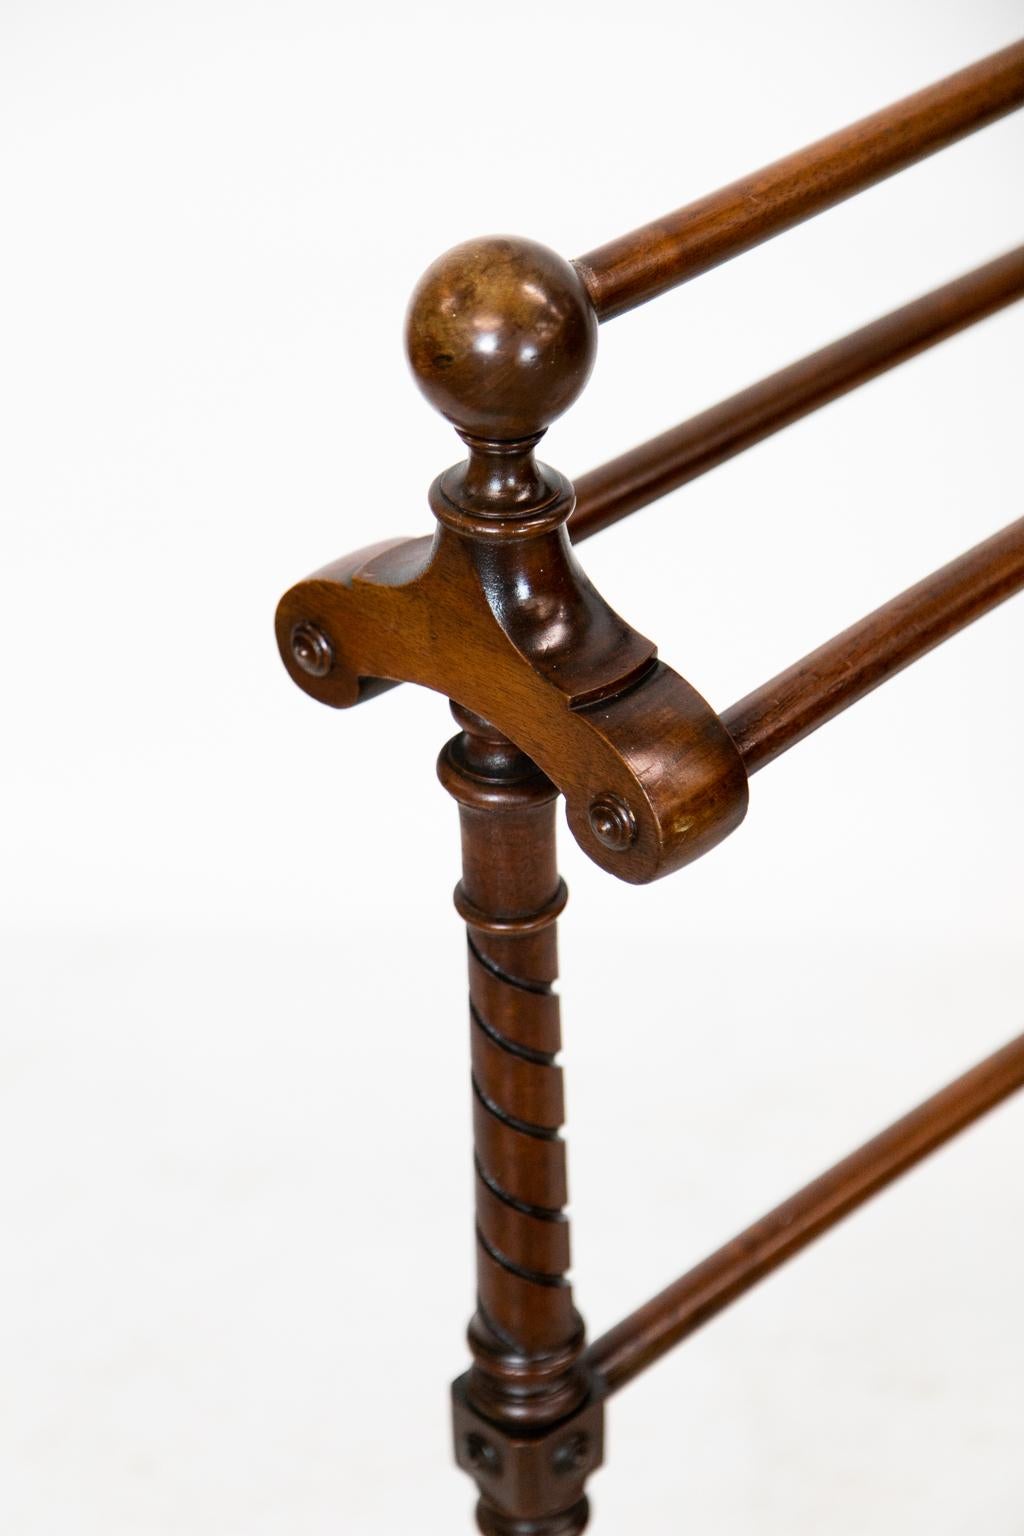 This mahogany blanket or towel rack has four rails. The top rail is supported by ends having cannon ball finials. The leg supports have carved spiral turnings that terminate in splayed legs which are connected by a double spiral turned stretcher.